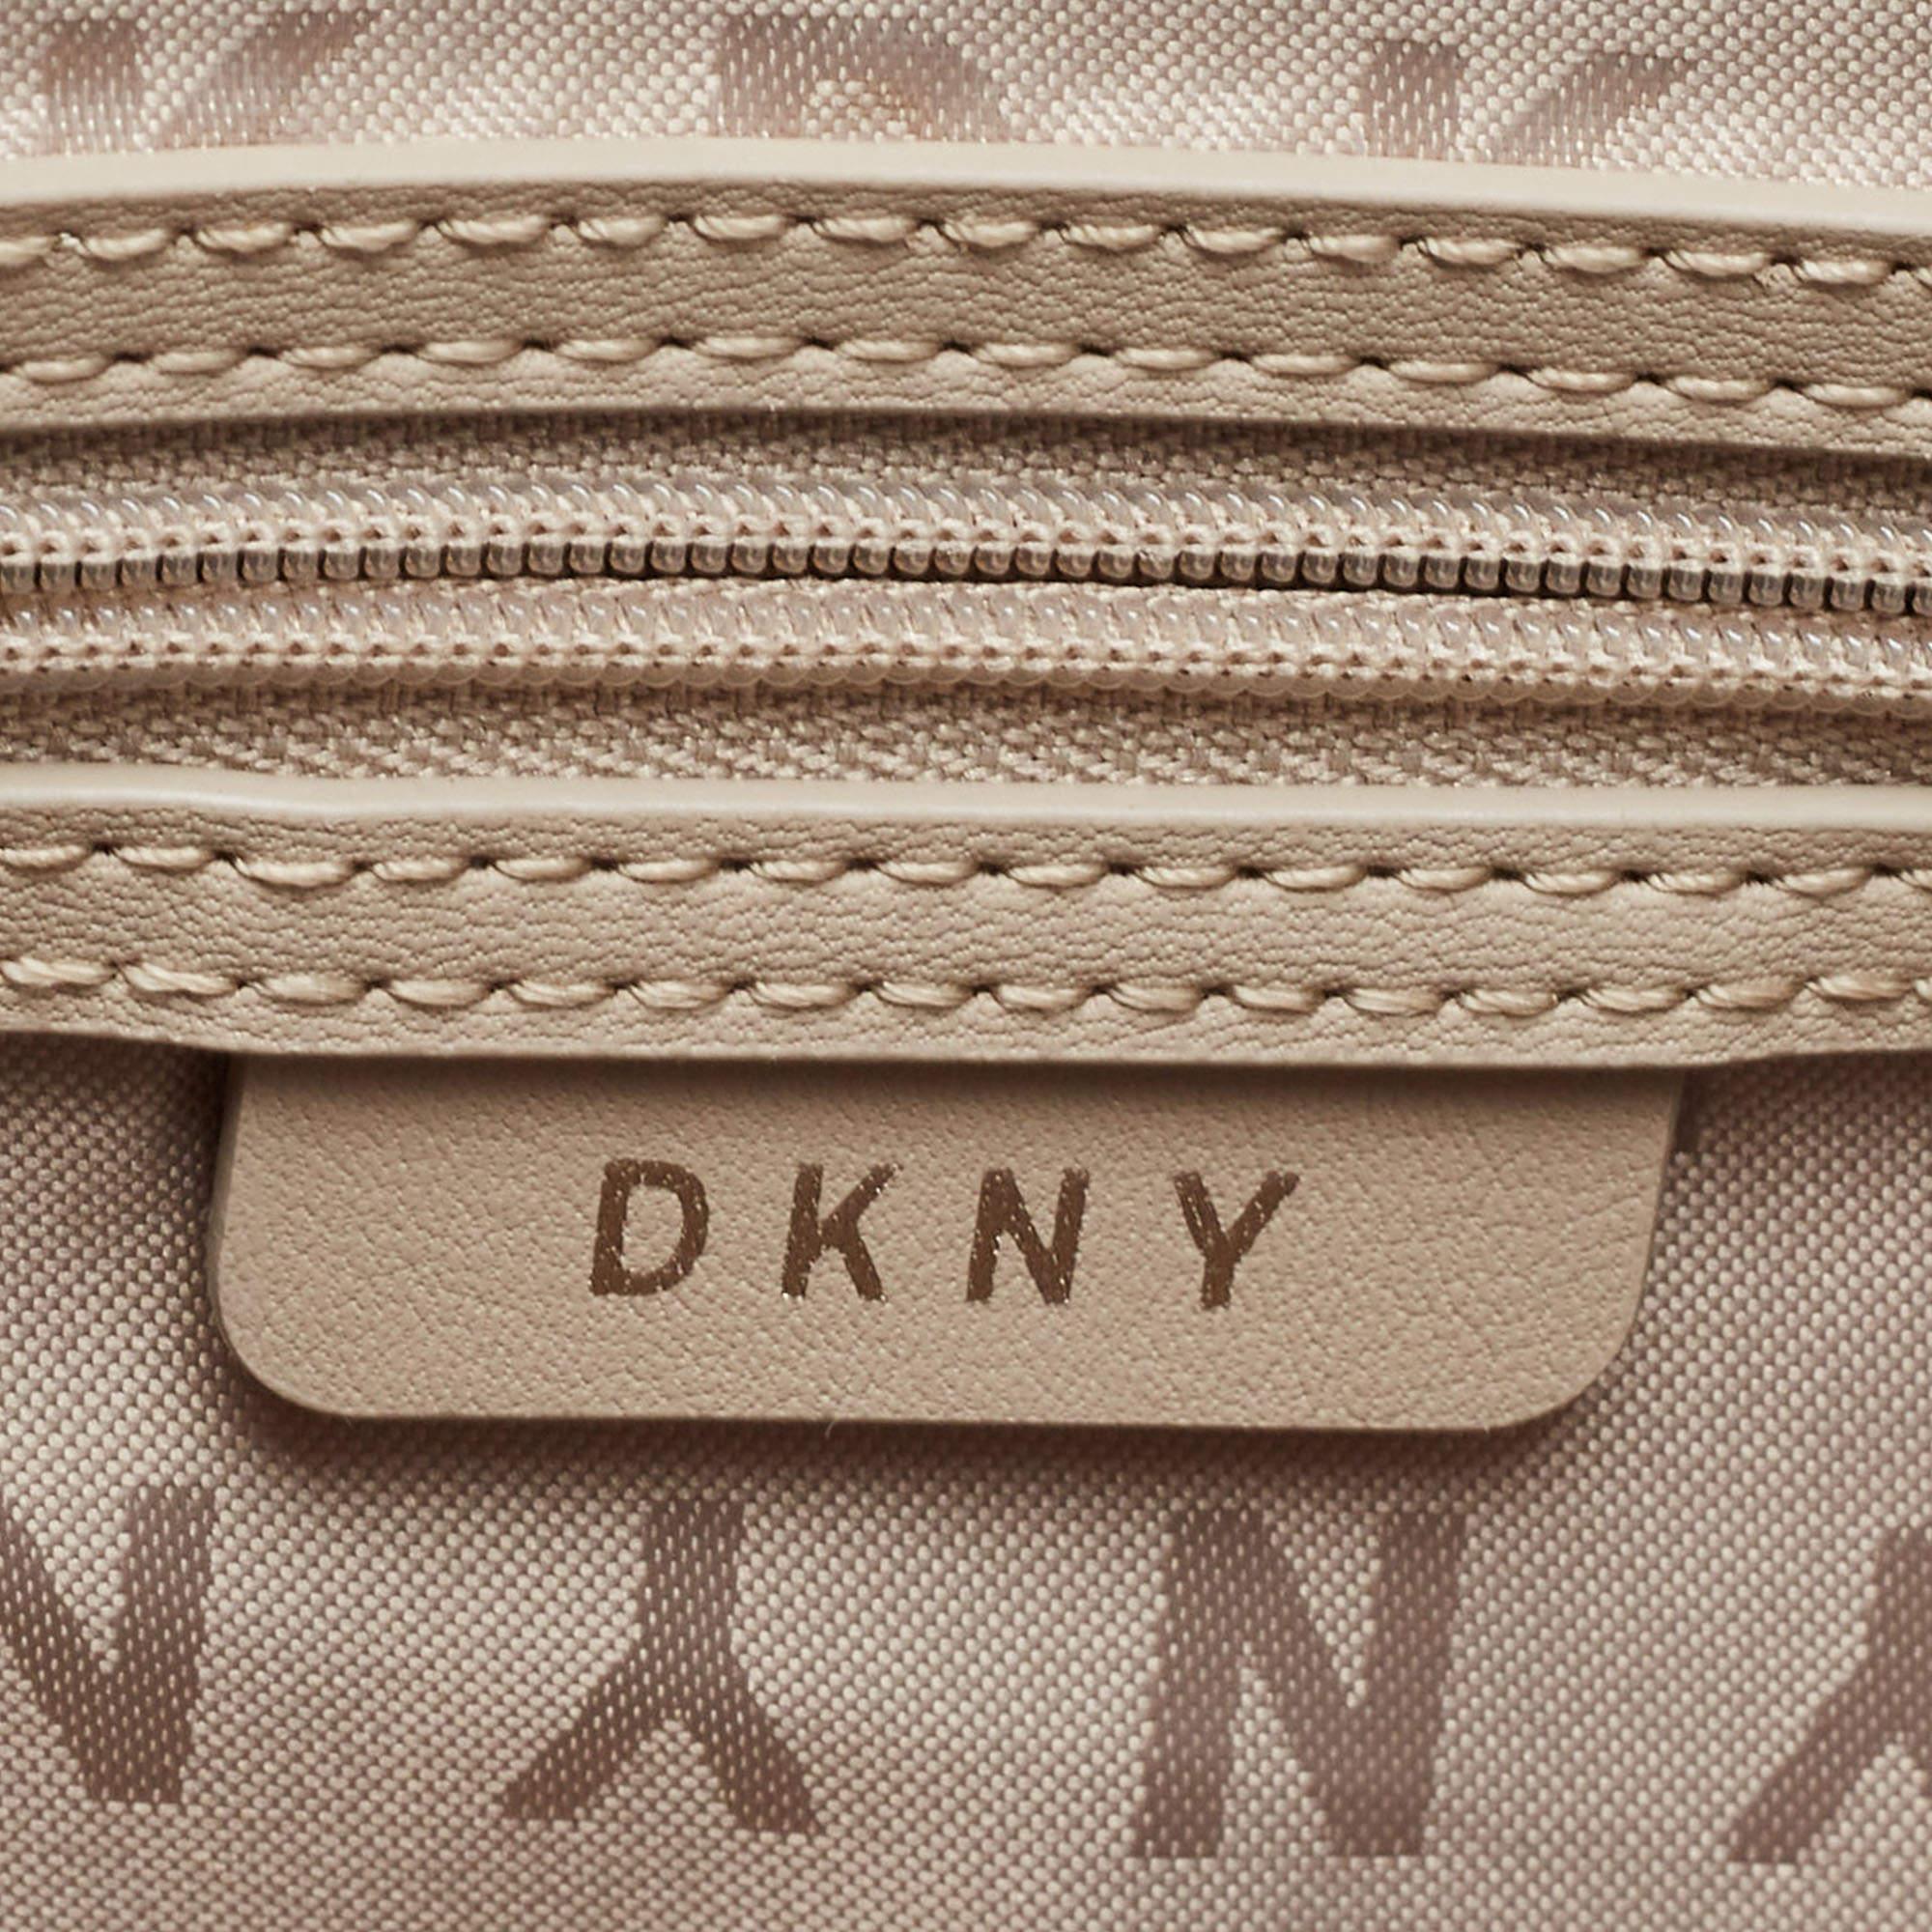 DKNY Beige/Brown Signature Coated Canvas and Leather Top Zip Shopper Tote 7